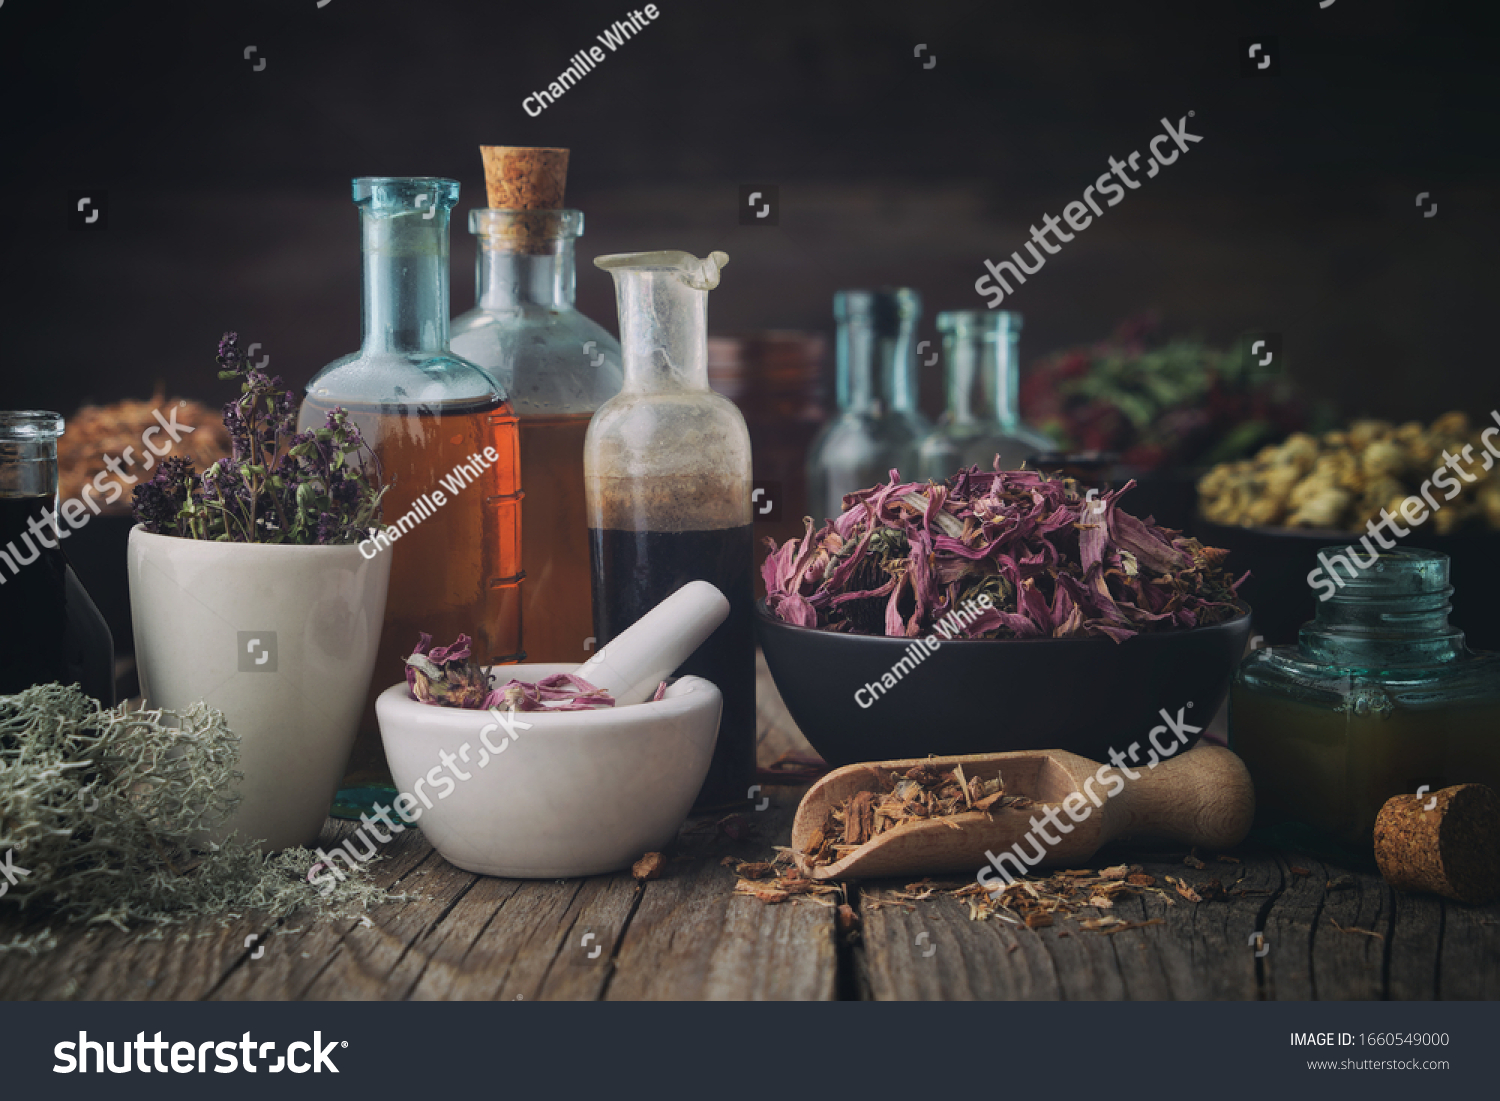 Bottles of healthy tincture or infusion, mortar and bowls of medicinal herbs on wooden table. Herbal medicine. #1660549000